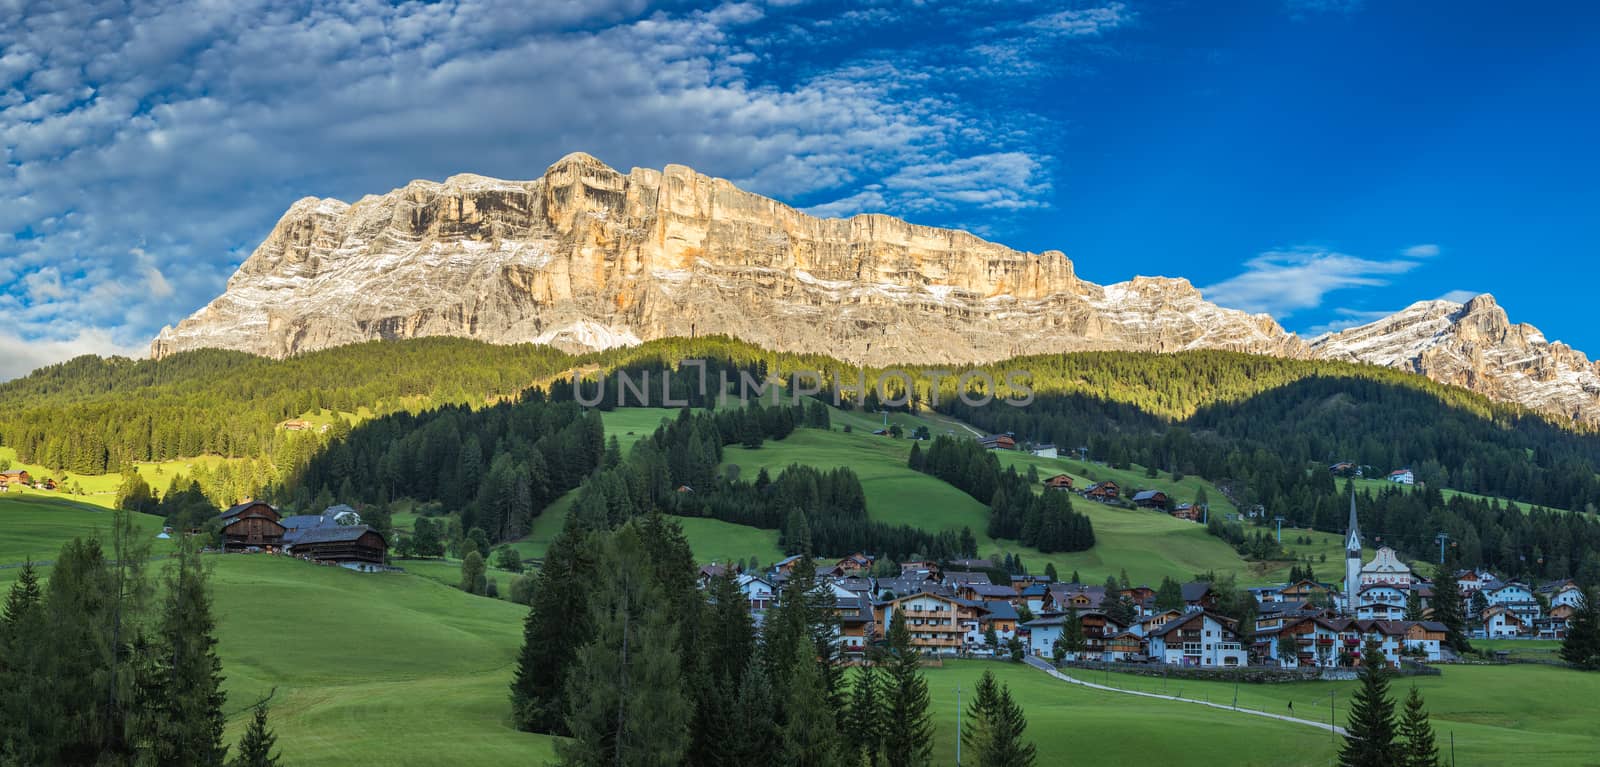 Great view of the National Park Dolomites (Dolomiti), famous loc by DaLiu